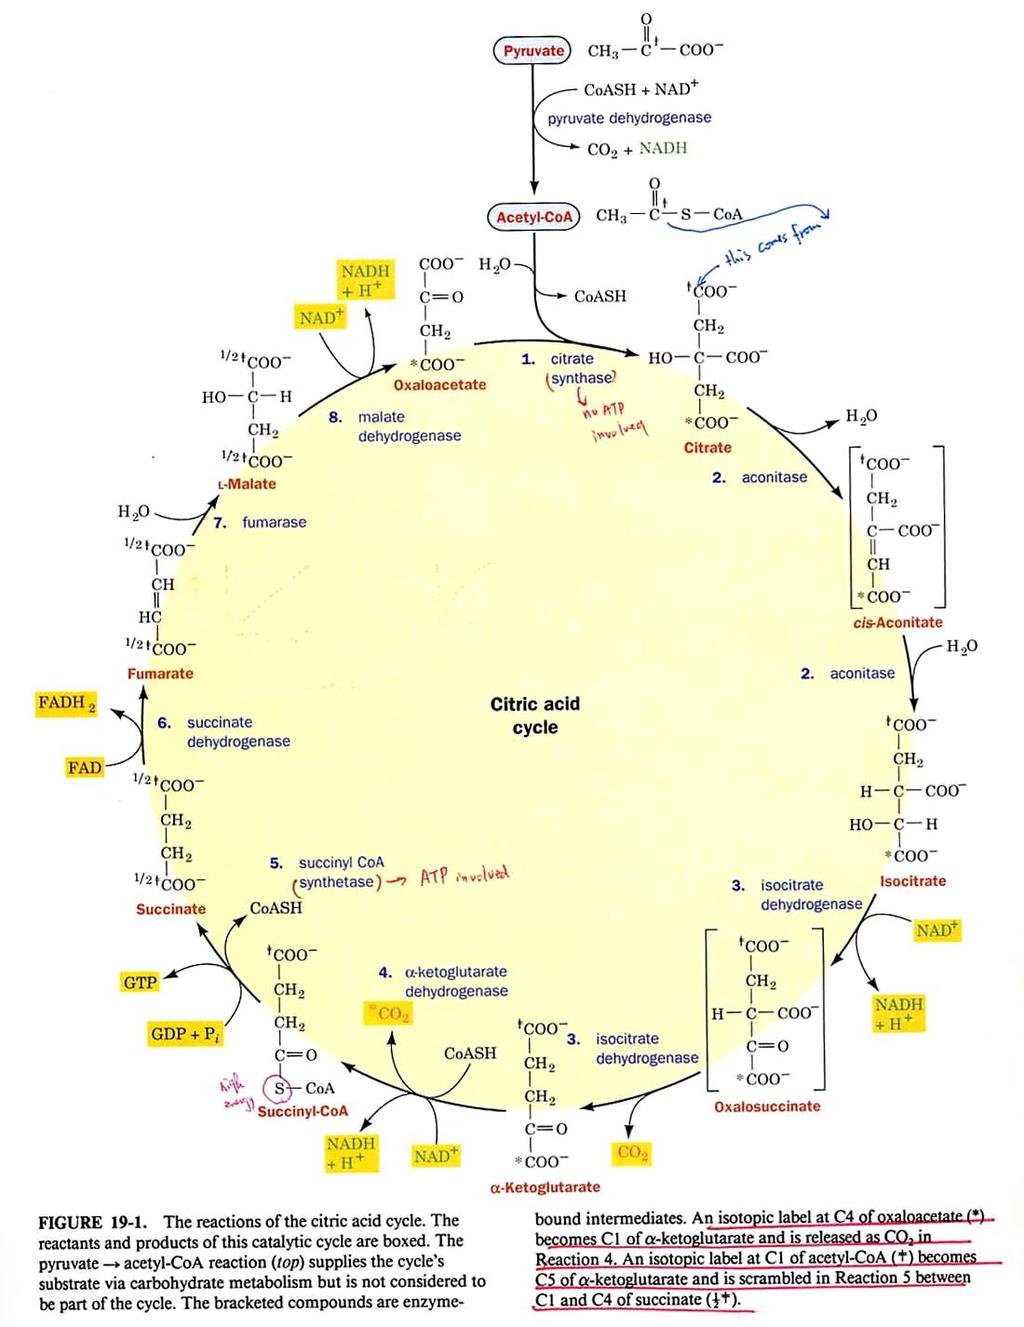 Tricarboxylic acid cycle (citric acid cycle, Krebs Cycle) The end product of the glycolysis, pyruvate, can be converted to acetyl coenzyme A (acetyl-coa).